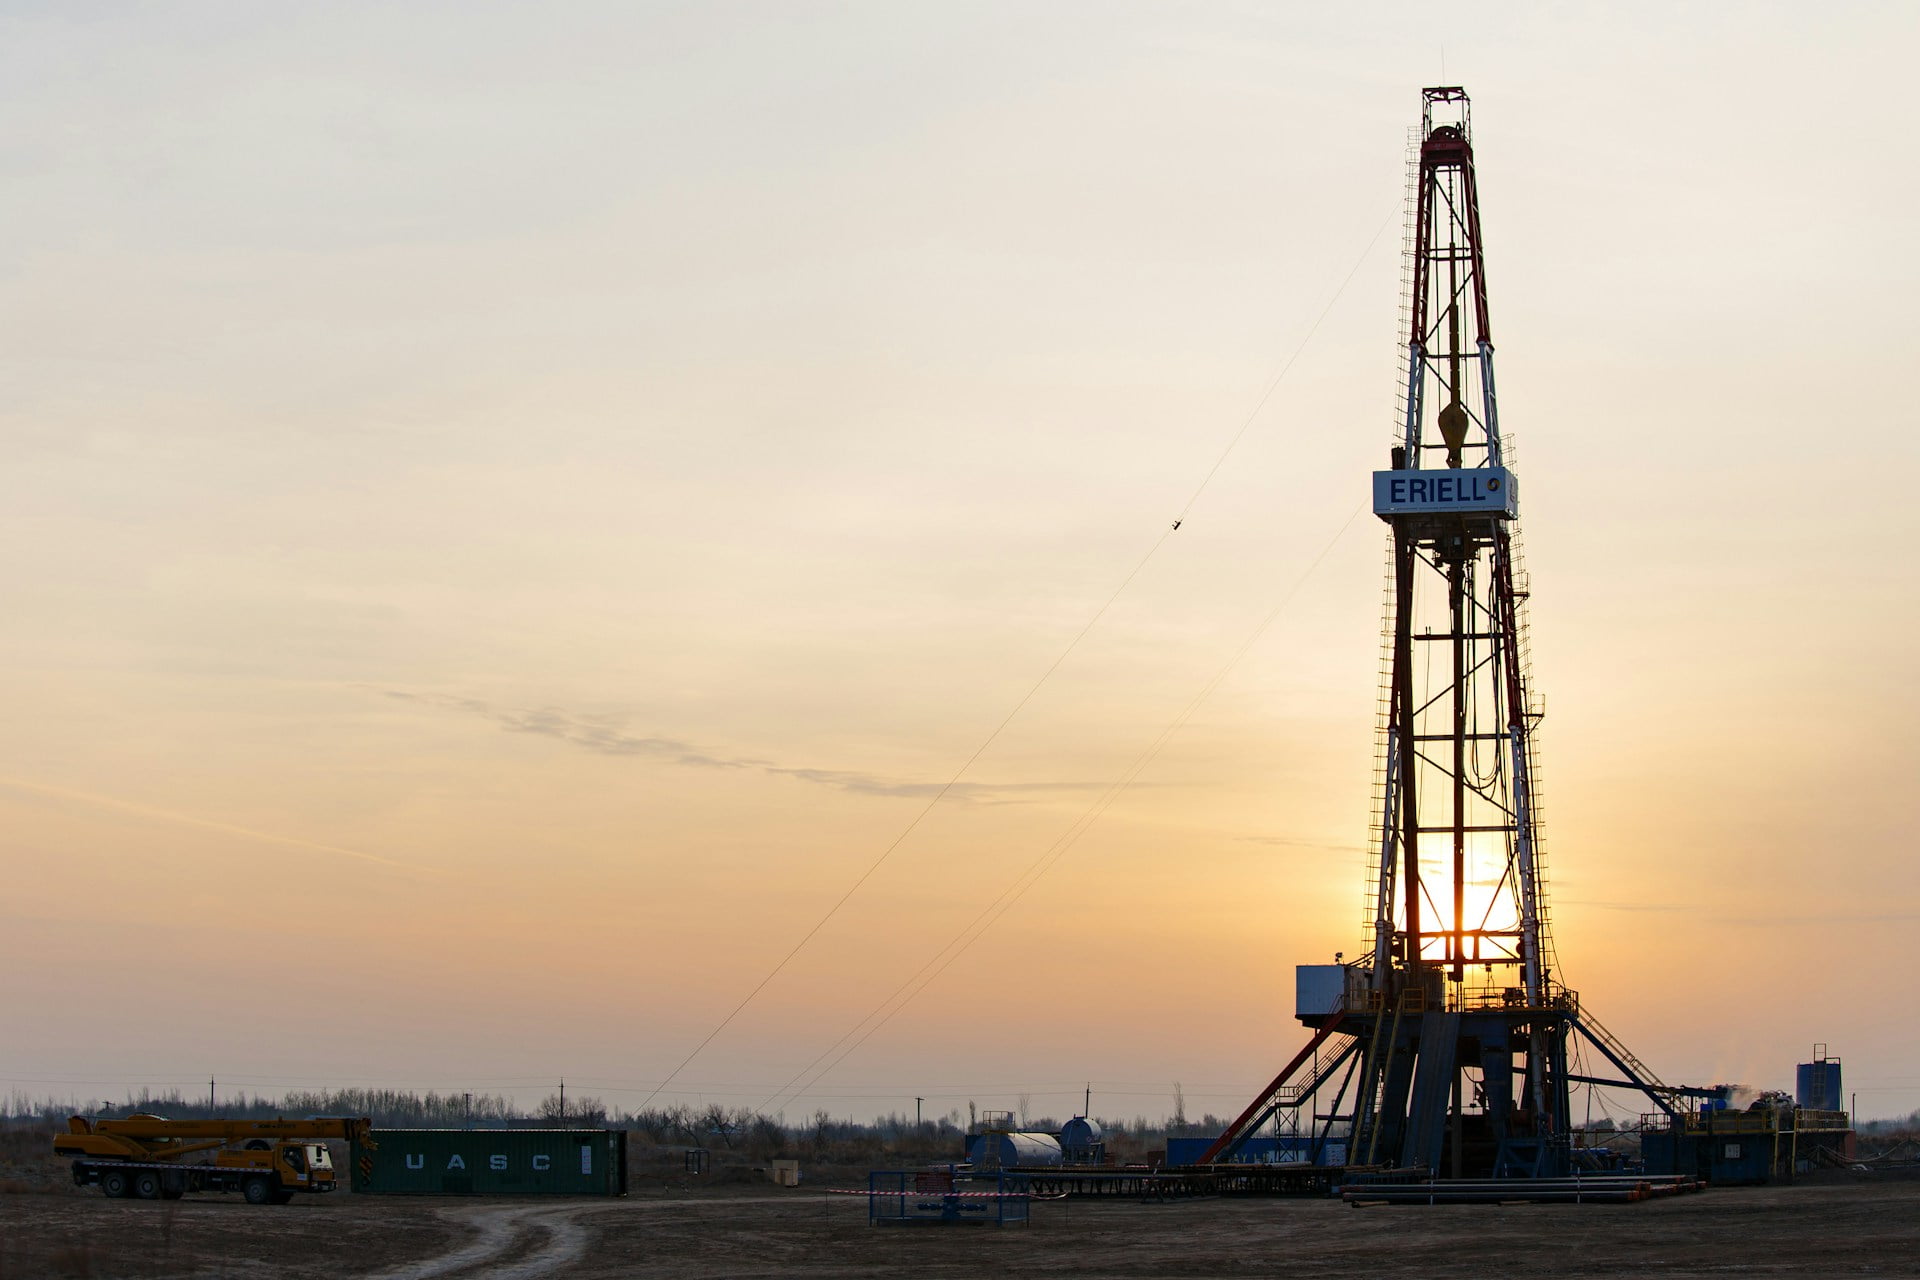 Key Benefits of Streamlining Gas and Oil Well Operations with Cost-Effective Crane Solutions